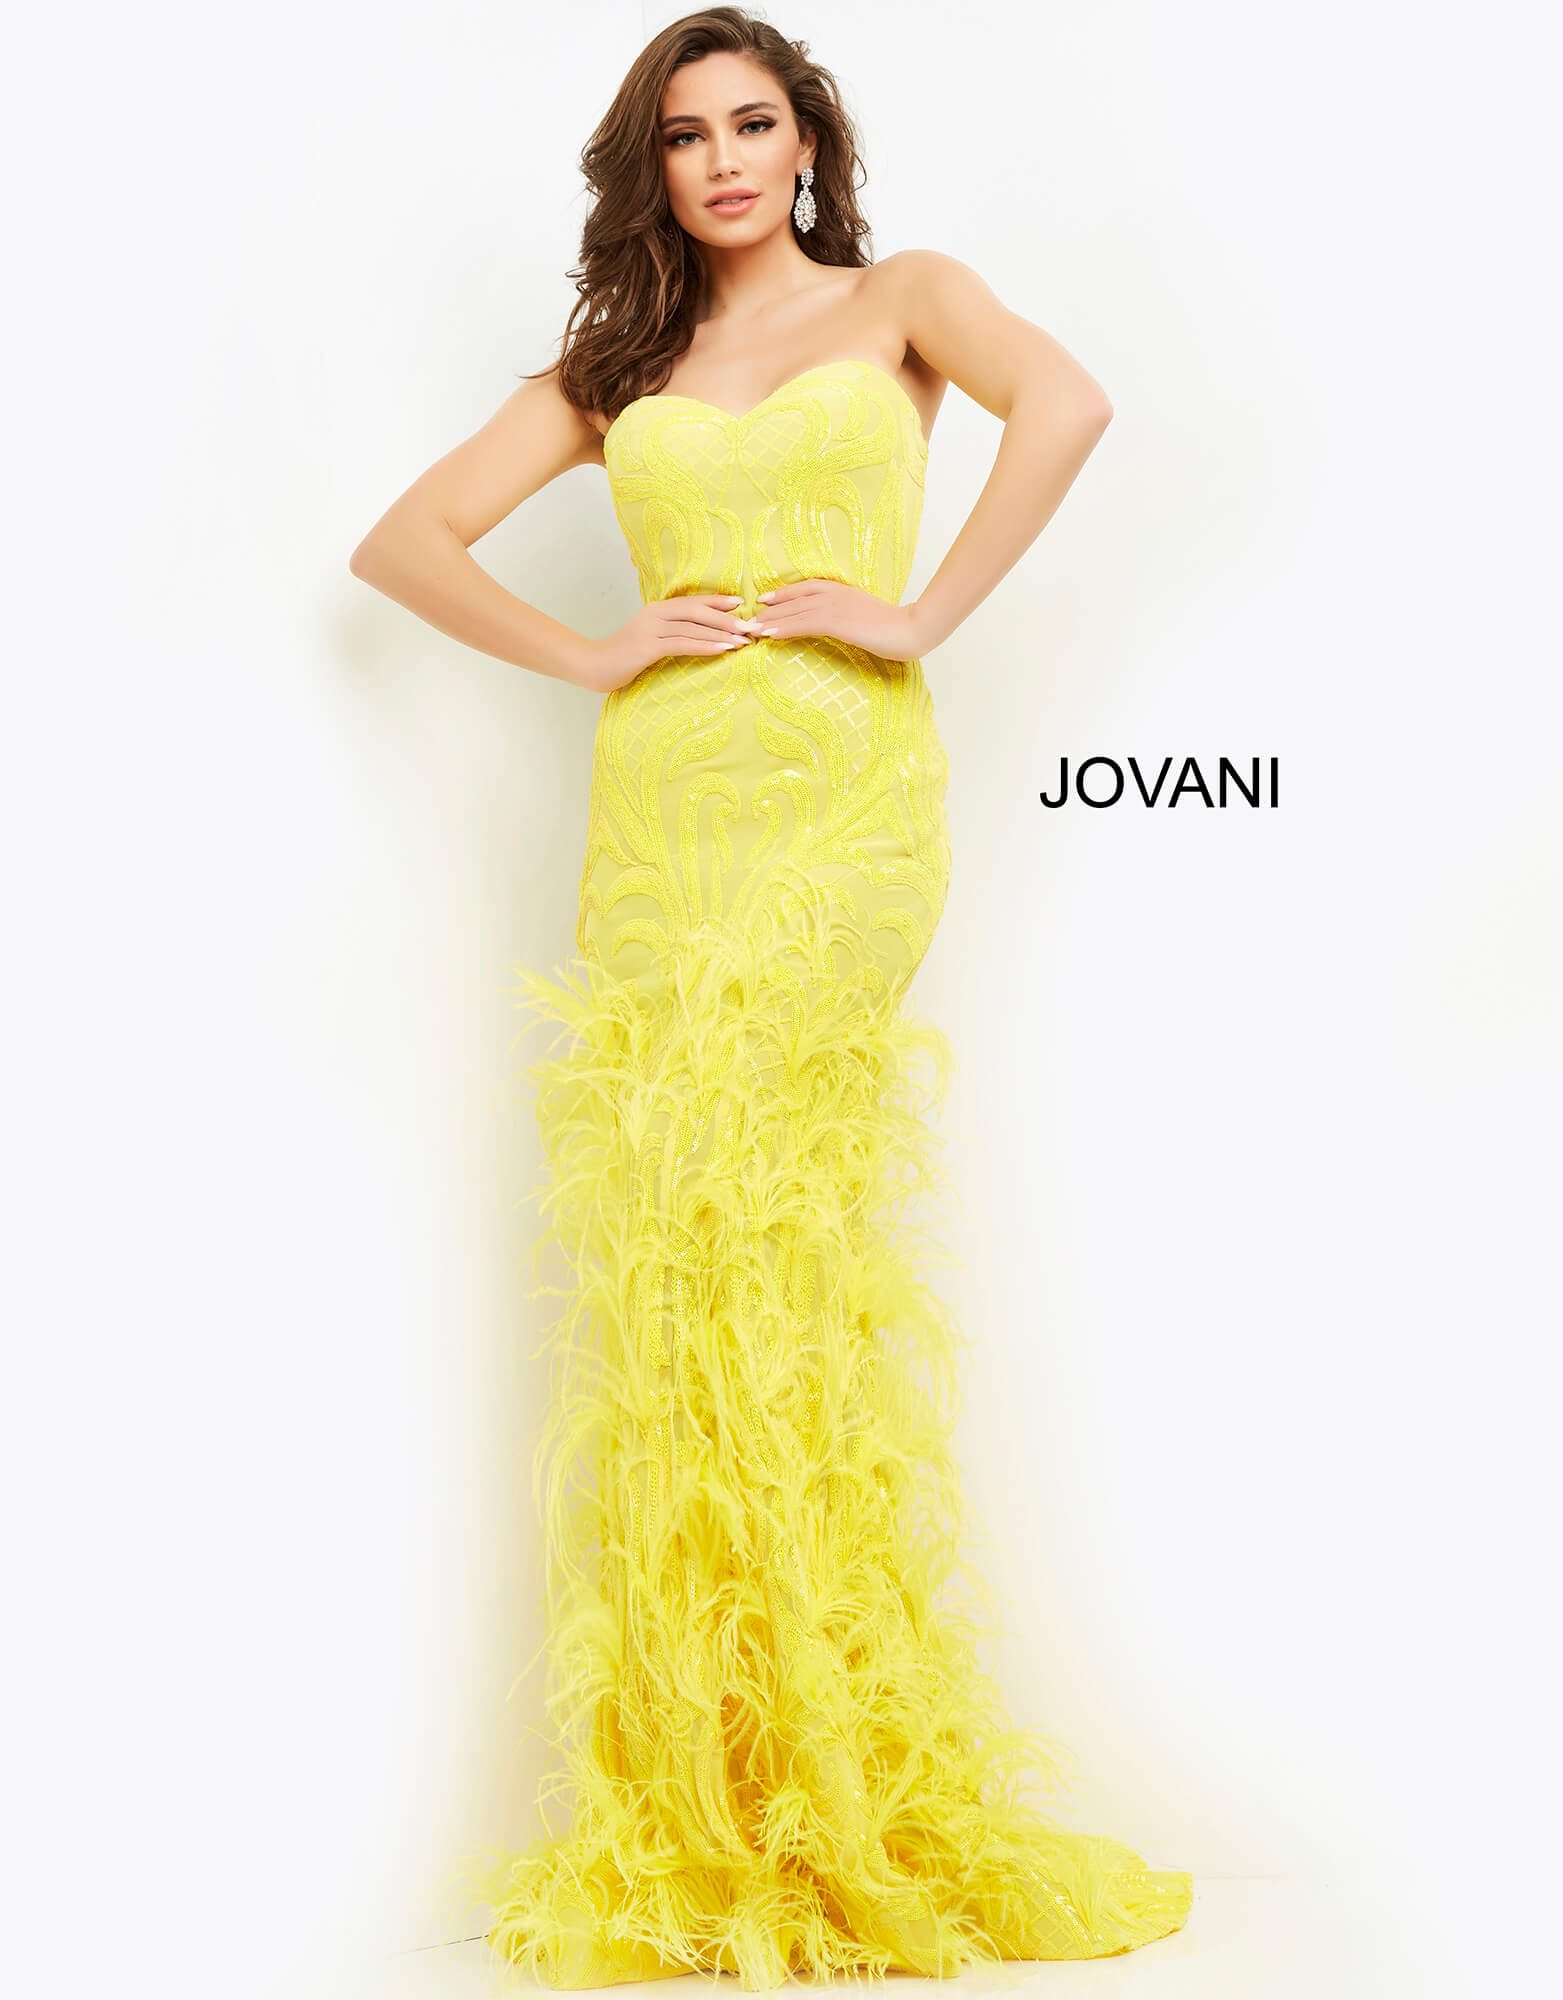 Jovani 05667 This is a long prom dress with feather details on the bottom of the skirt.  This pageant gown has a sweetheart neckline and is strapless.  Perfect evening gown for a Red Carpet event.  Colors:  Yellow, White  Sizes  00-24